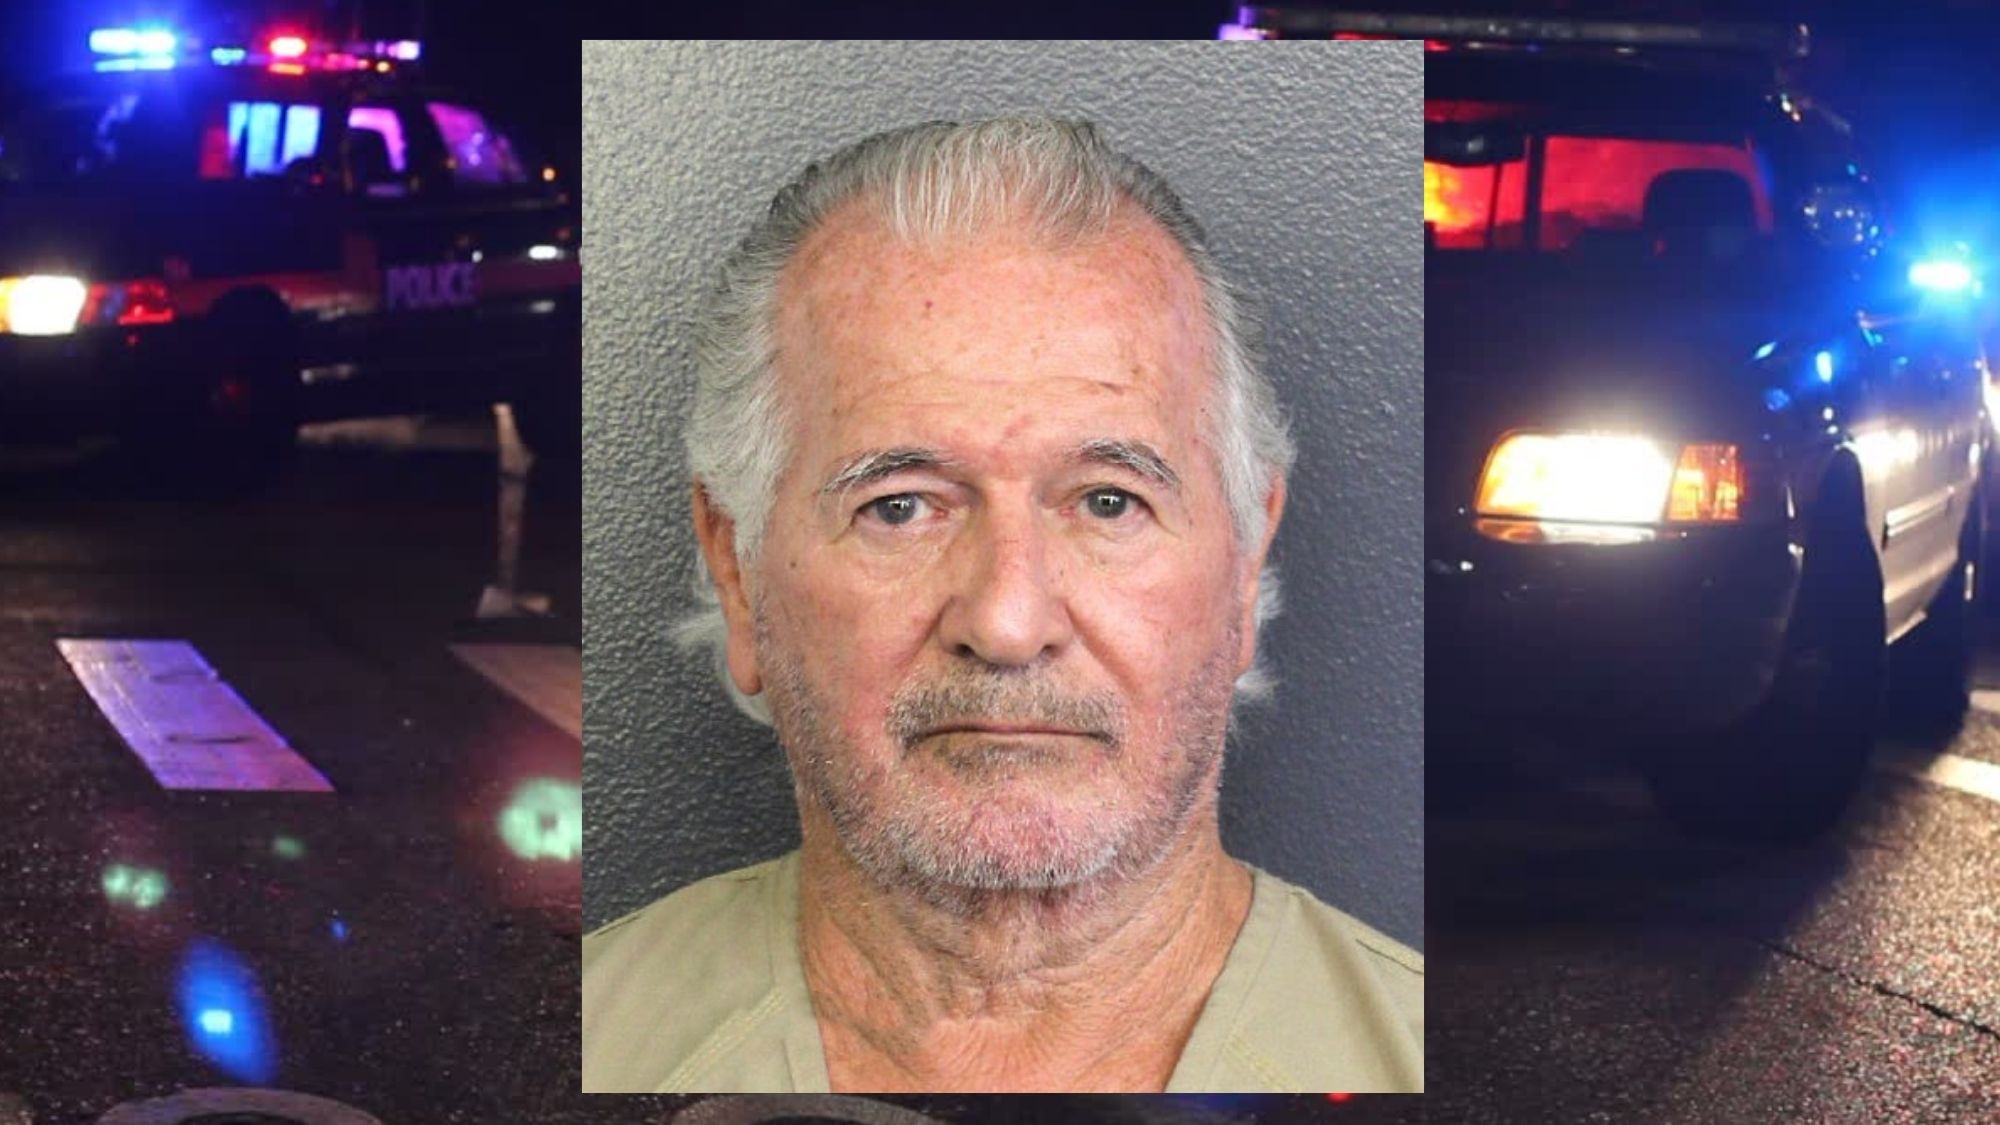 Tamarac Homeowner's Association President Used His Position to Terrorize Neighbors, BSO Says